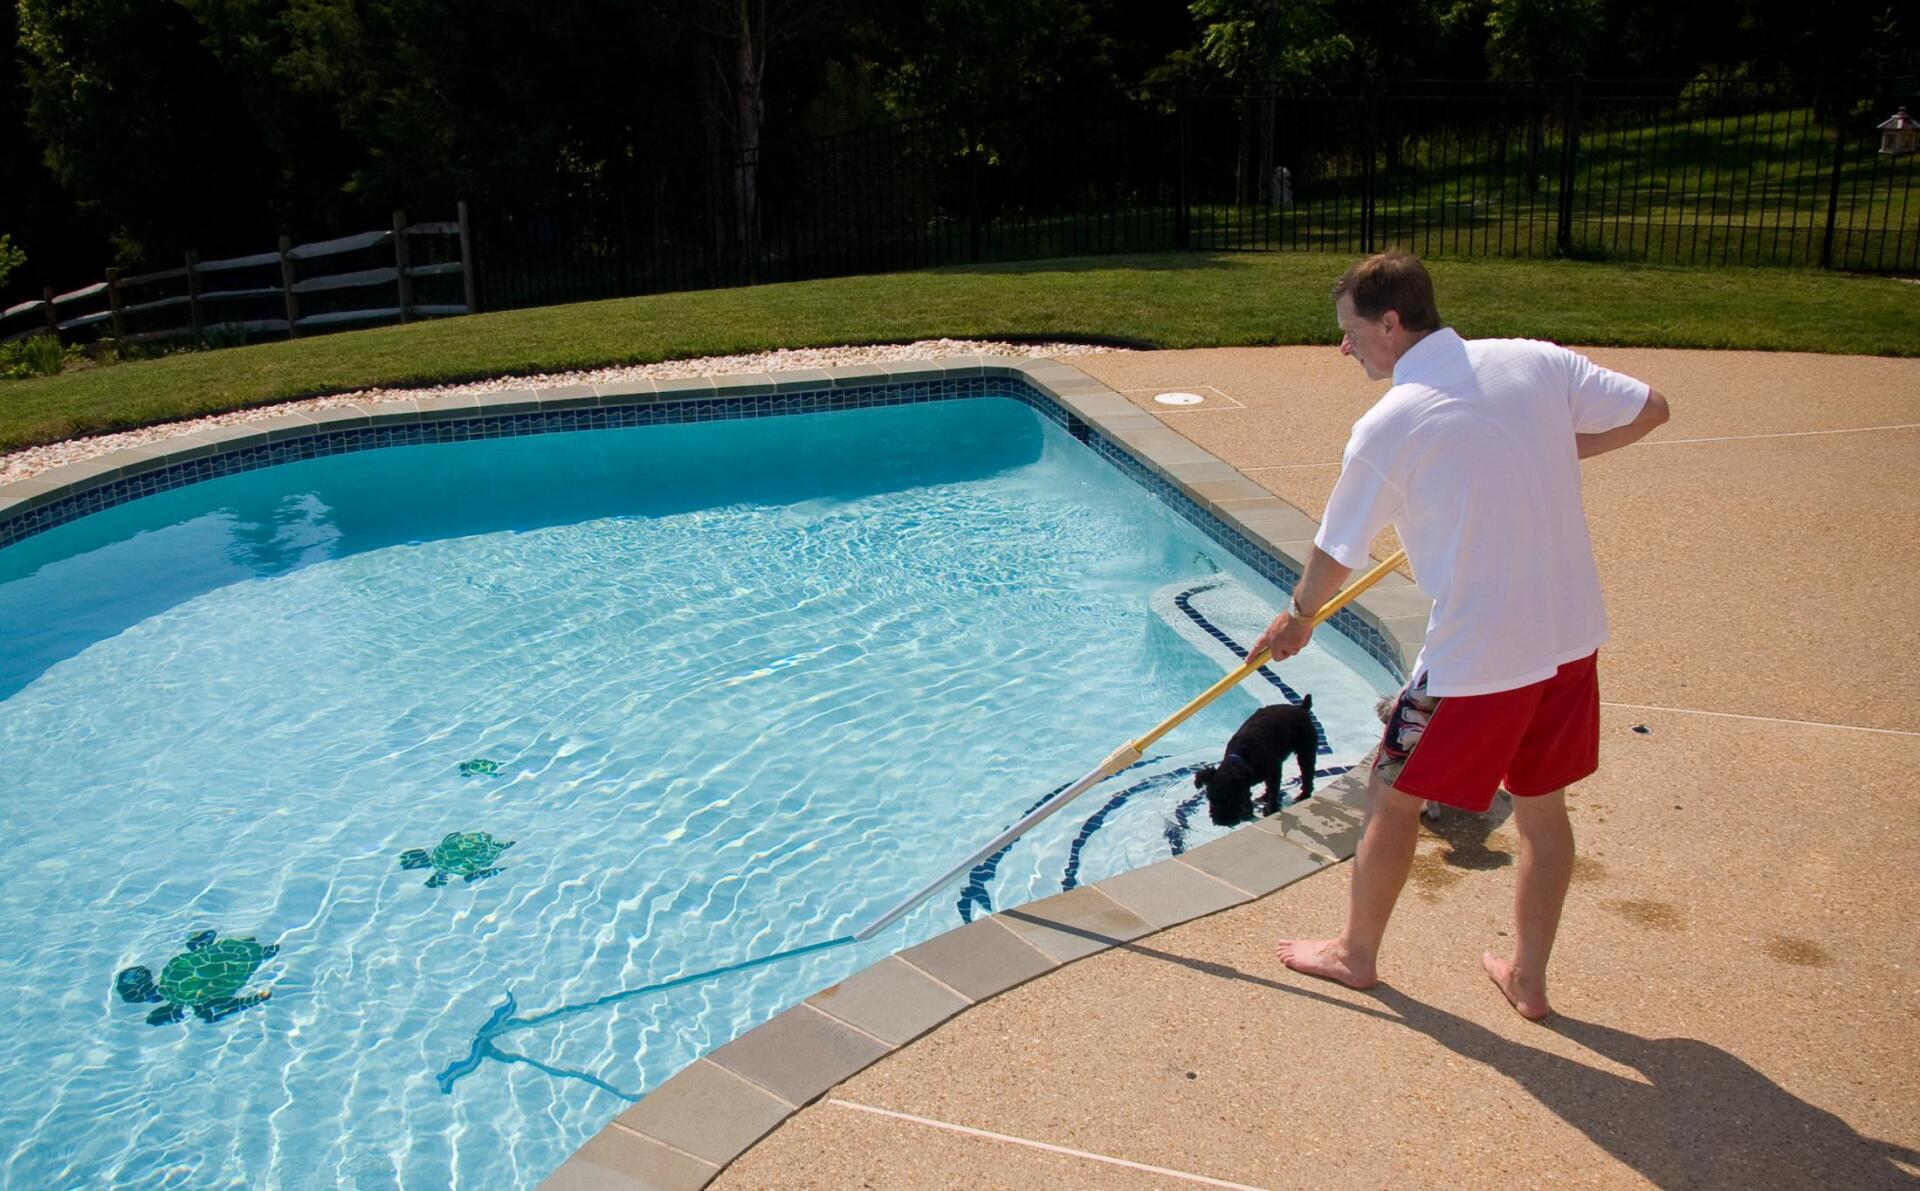 worker cleaning the pool